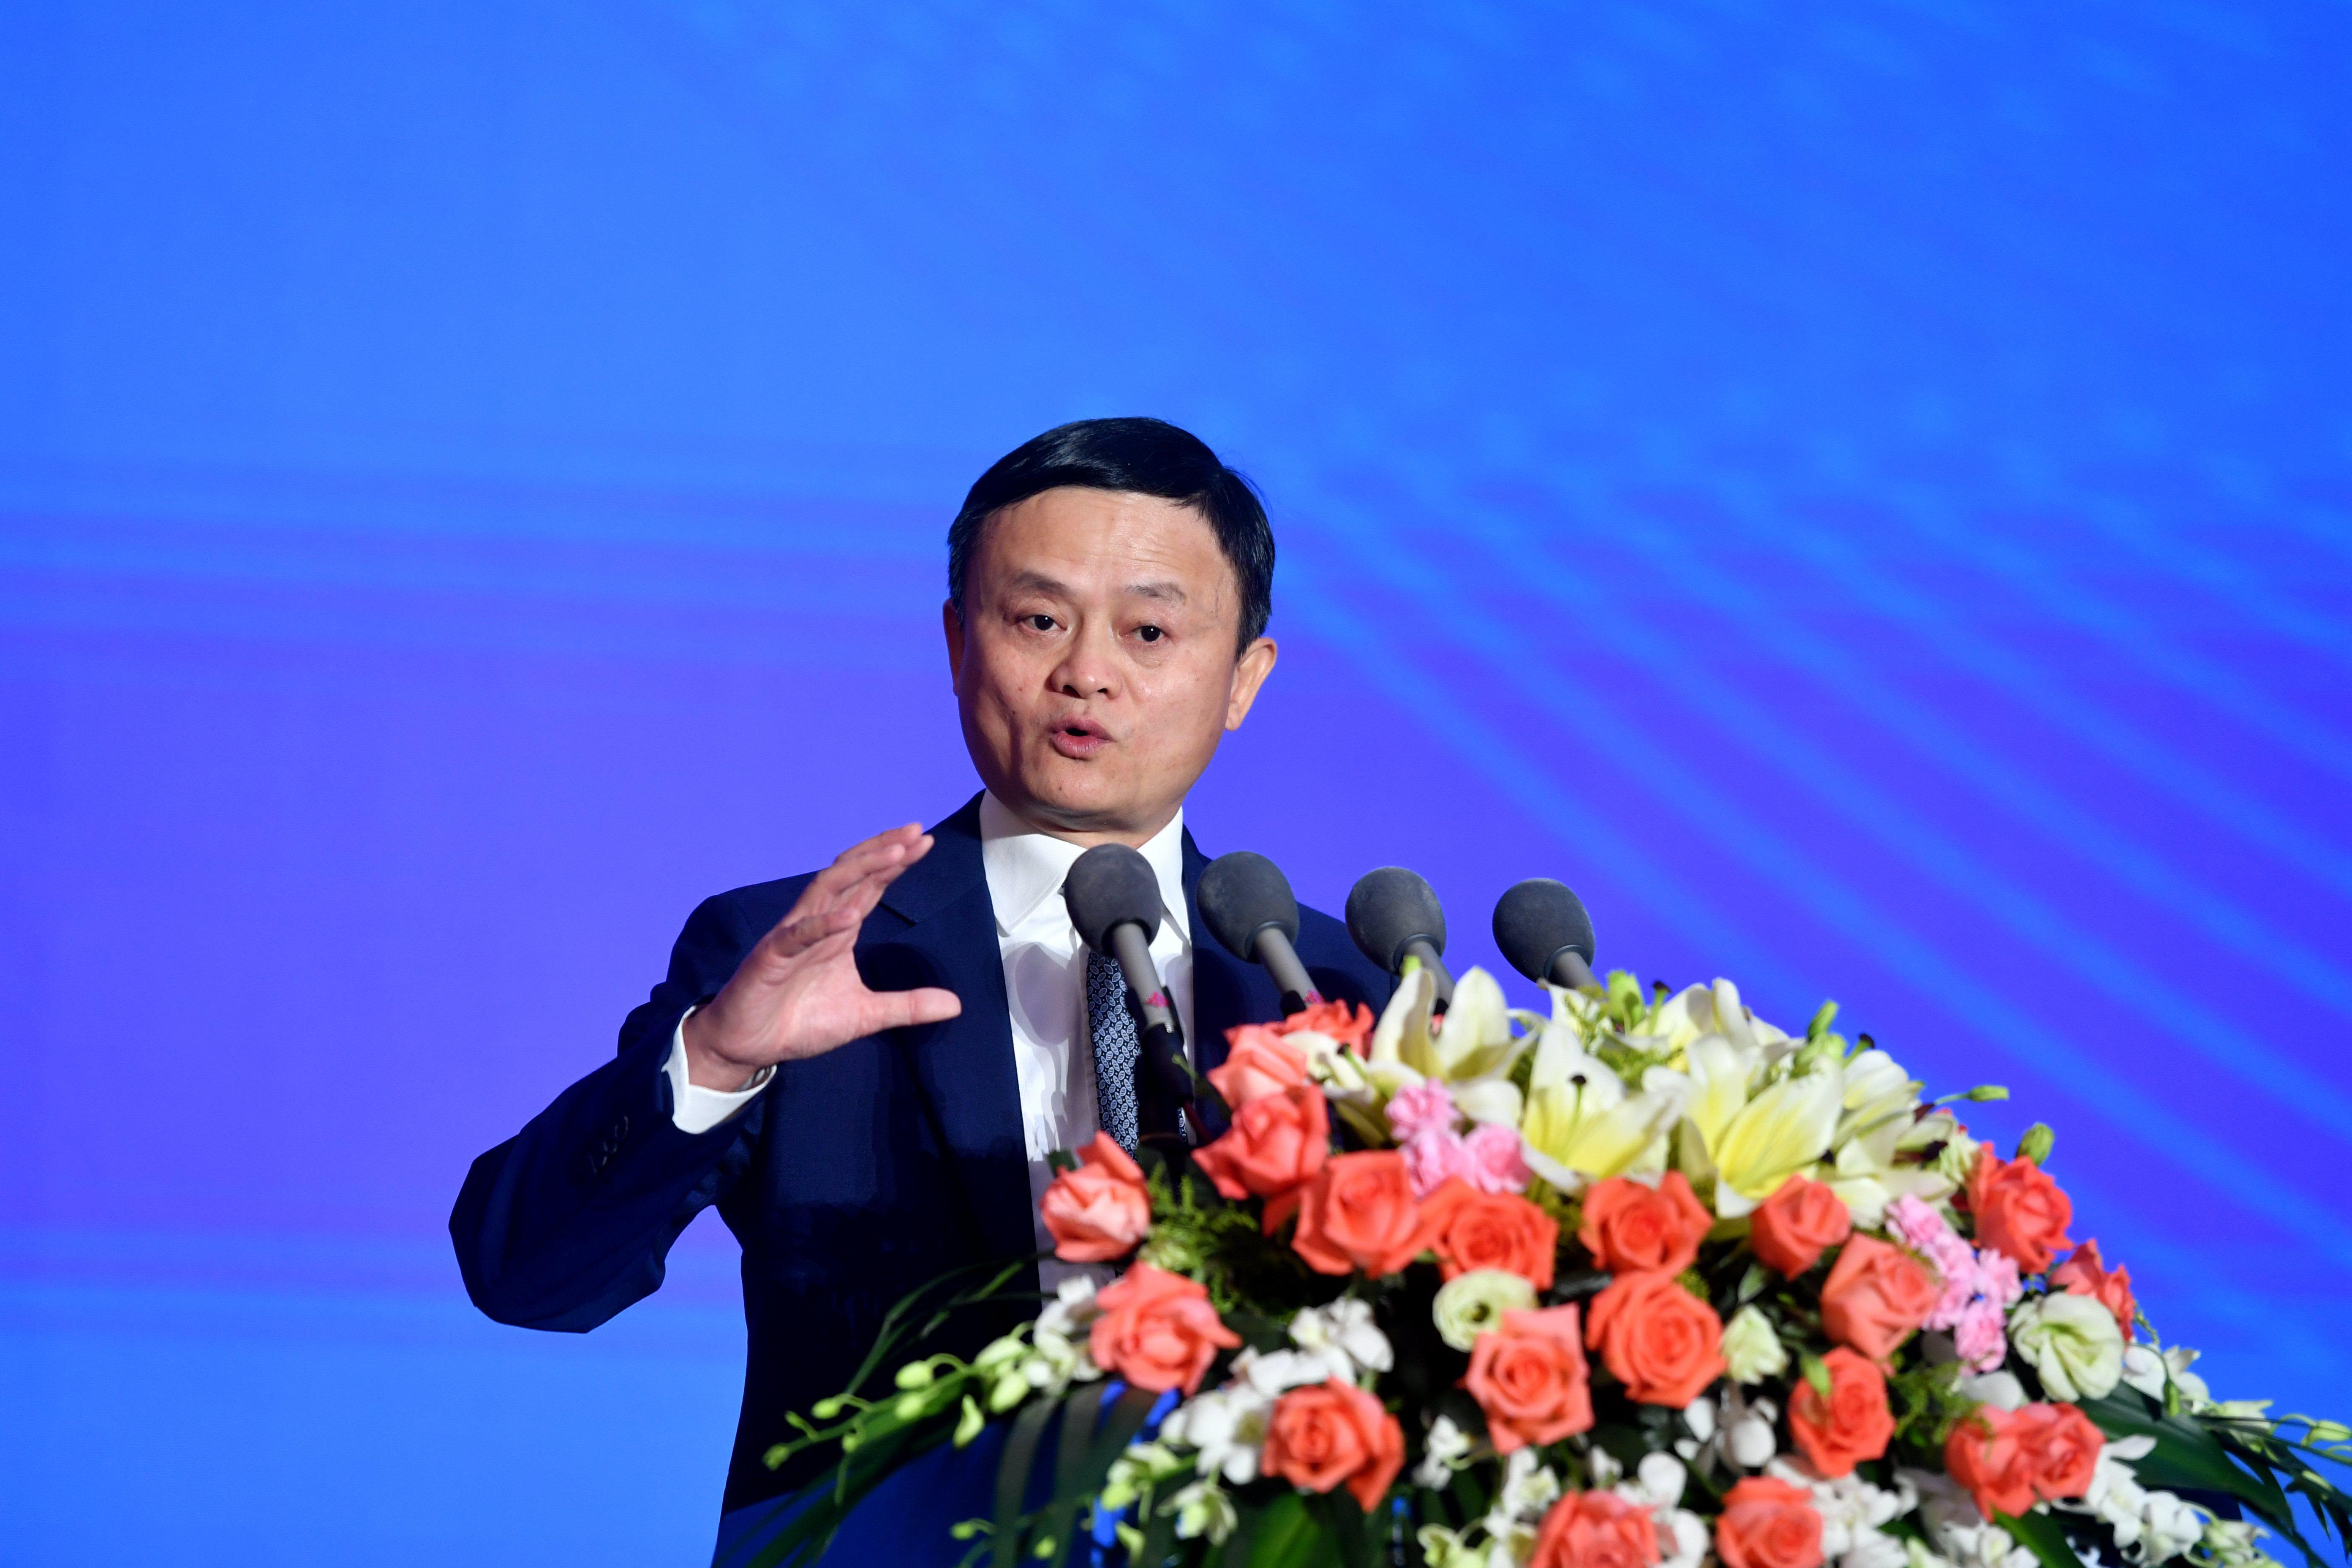 Jack Ma, founder of Alibaba, reappears after suppressing his technological empire